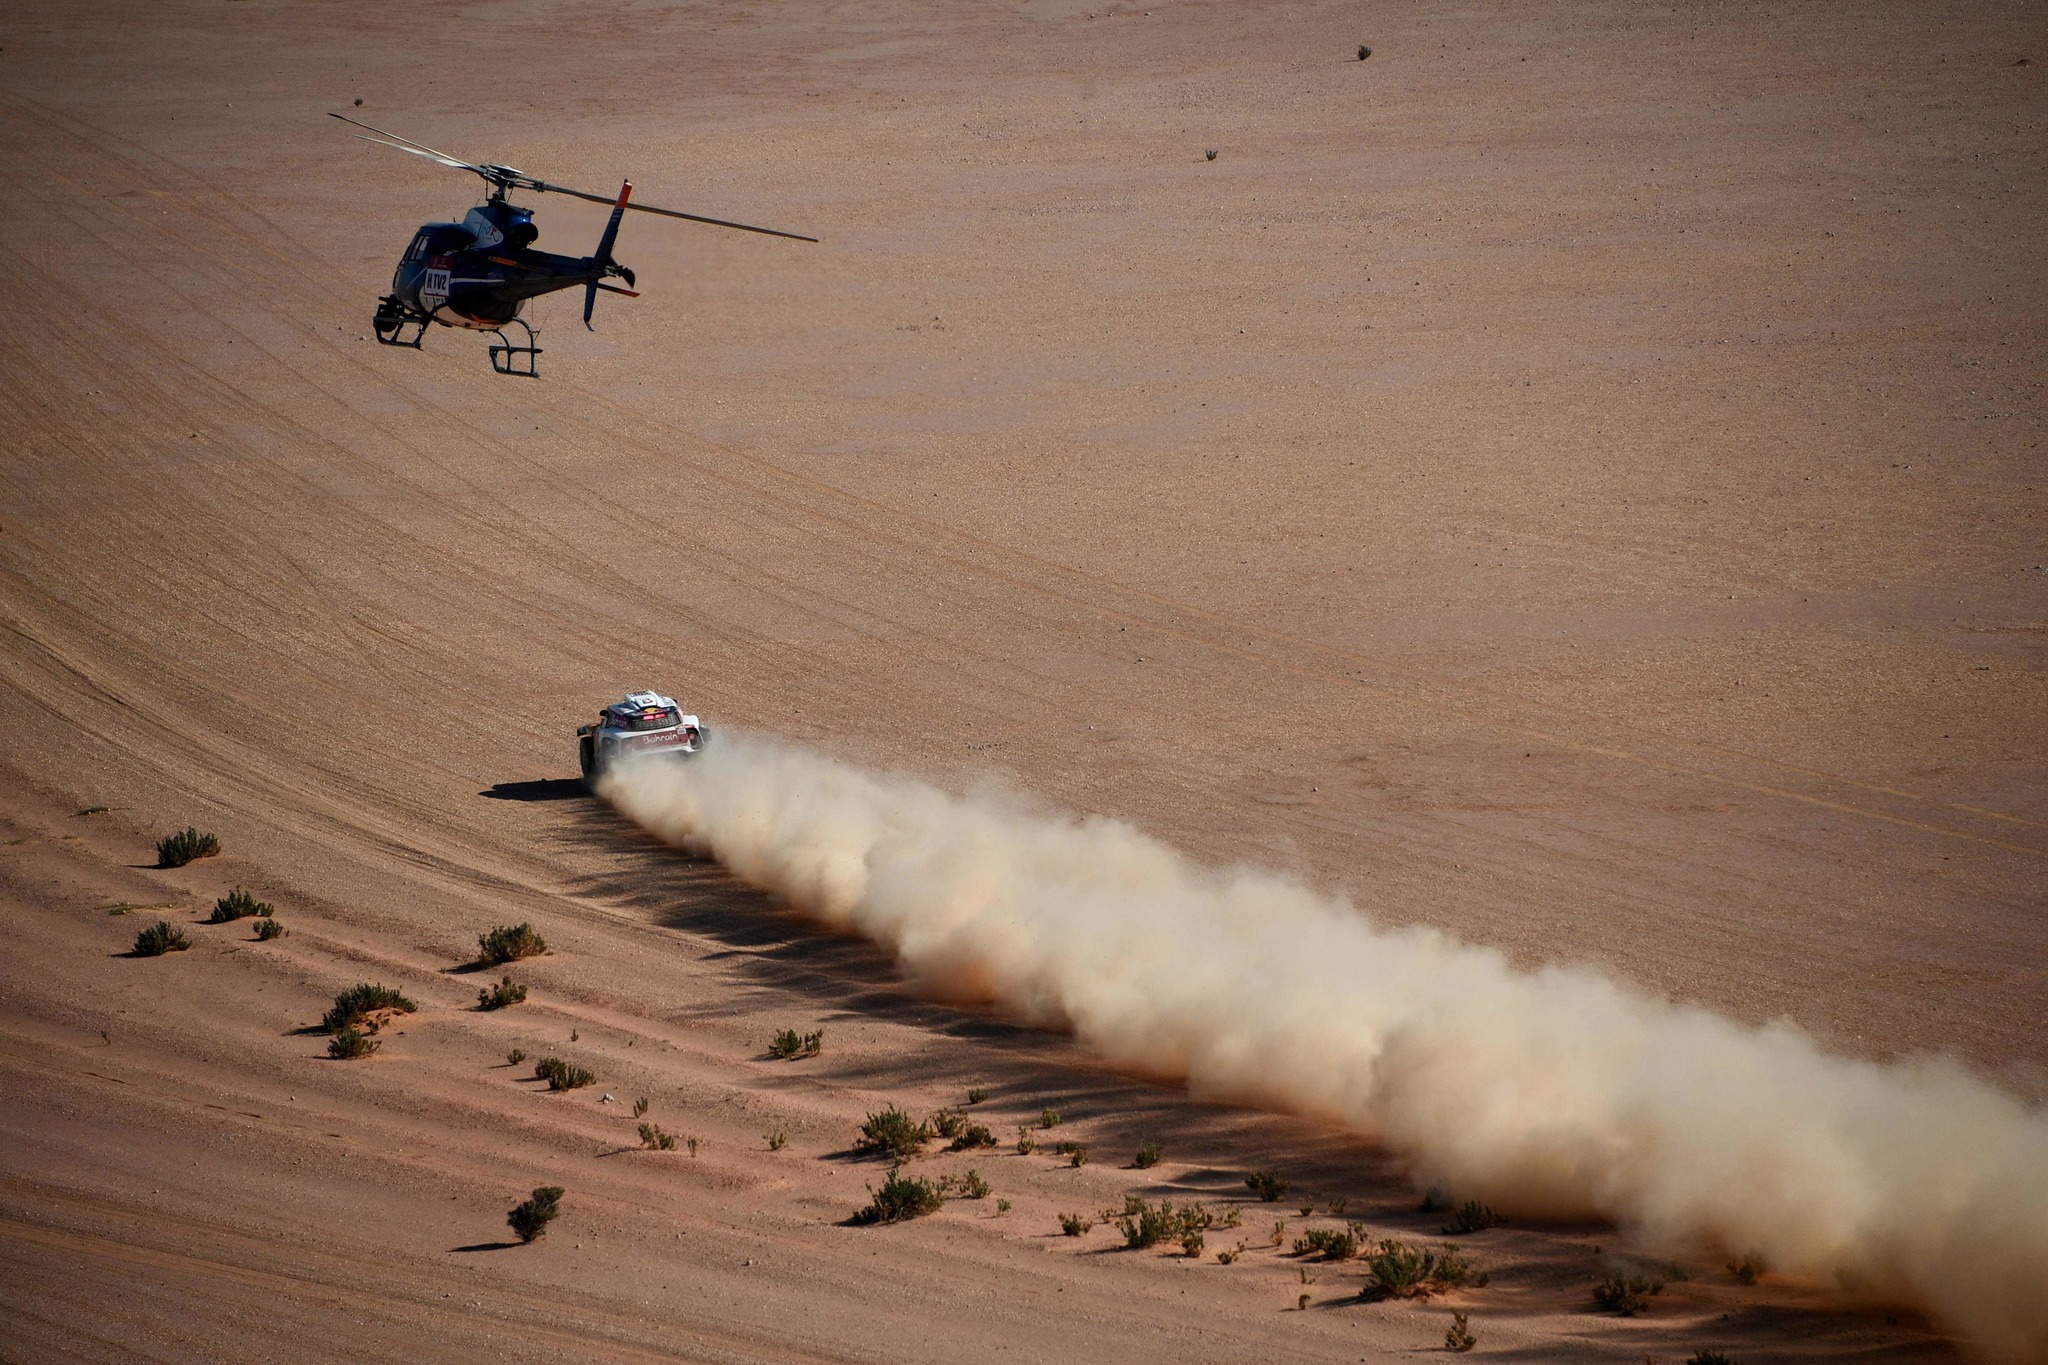 TOPSHOT - First-placed for the auto category JCW X-RAID Mini Team Spains driver Carlos <HIT>Sainz</HIT> competes during the stage 12 of the Dakar 2020 between Haradh and Qiddiya, Saudi Arabia, on January 17, 2020. (Photo by FRANCK FIFE / AFP)